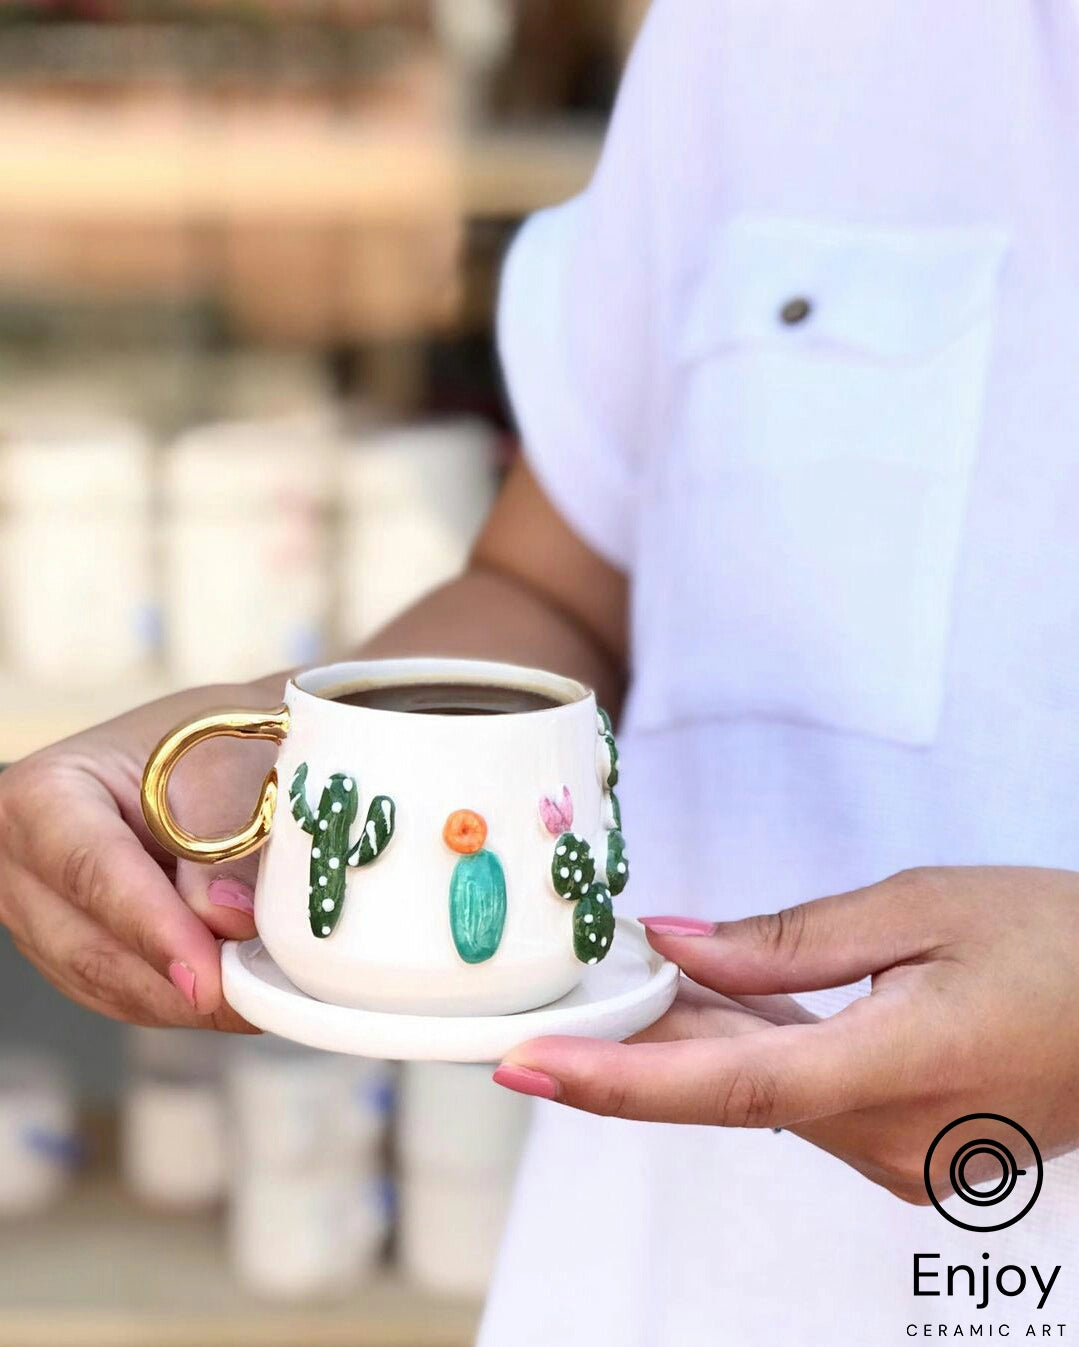 Two hands gently holding a white mug with a golden handle and a saucer. The mug is decorated with 3D cactus designs and colorful flowers, filled with coffee.